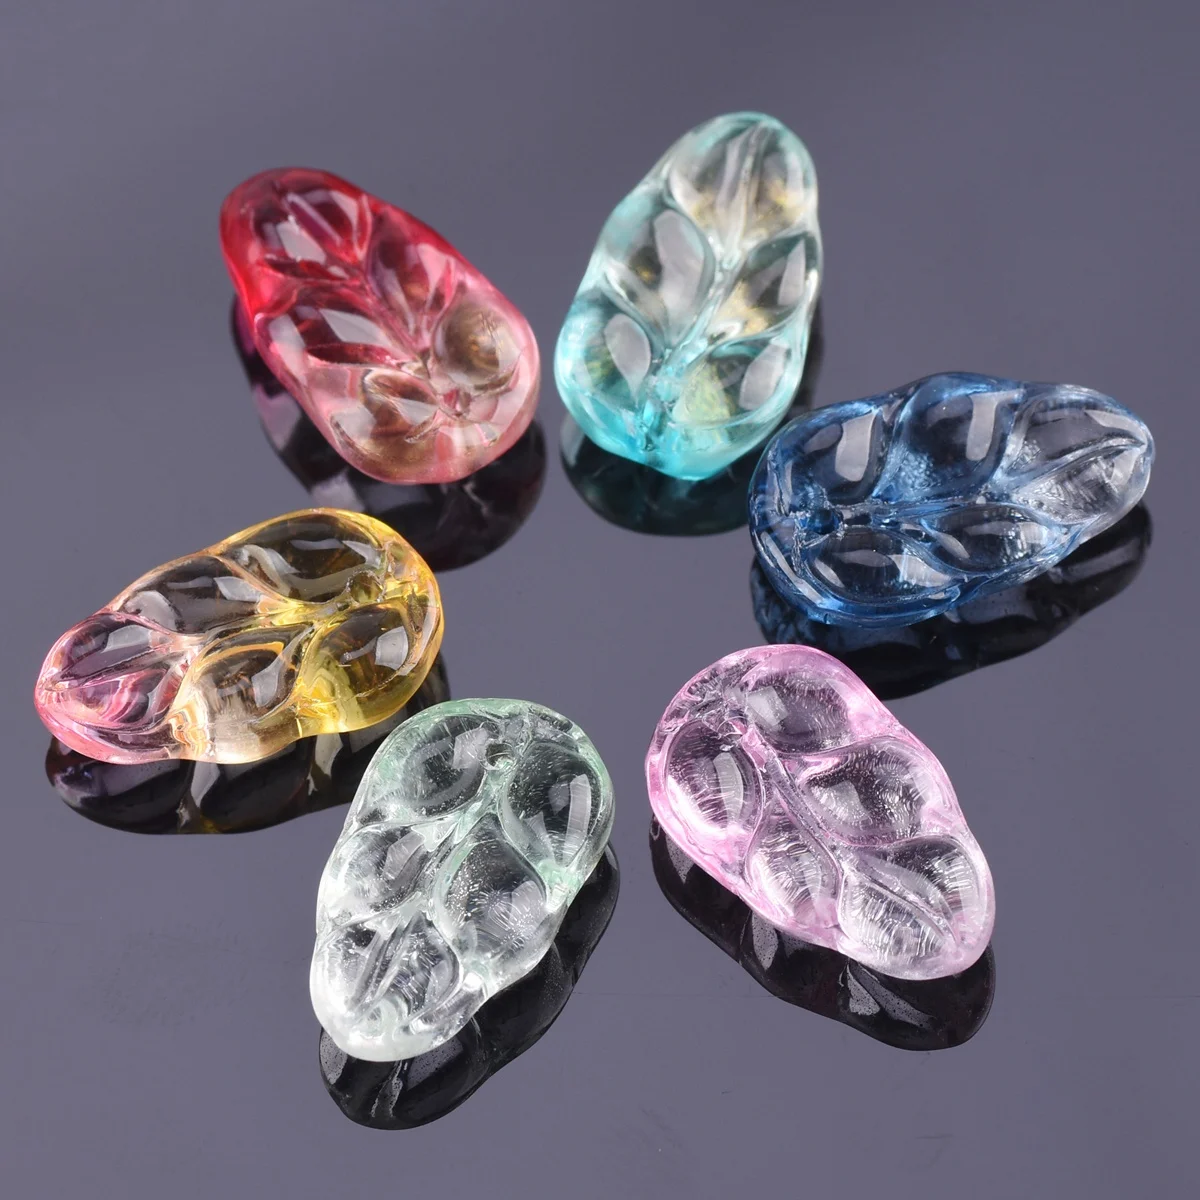 

10pcs 18x10mm Leaf Petal Shape Crystal Glass Loose Crafts Beads Top Drilled Pendants for Earring Jewelry Making DIY Crafts